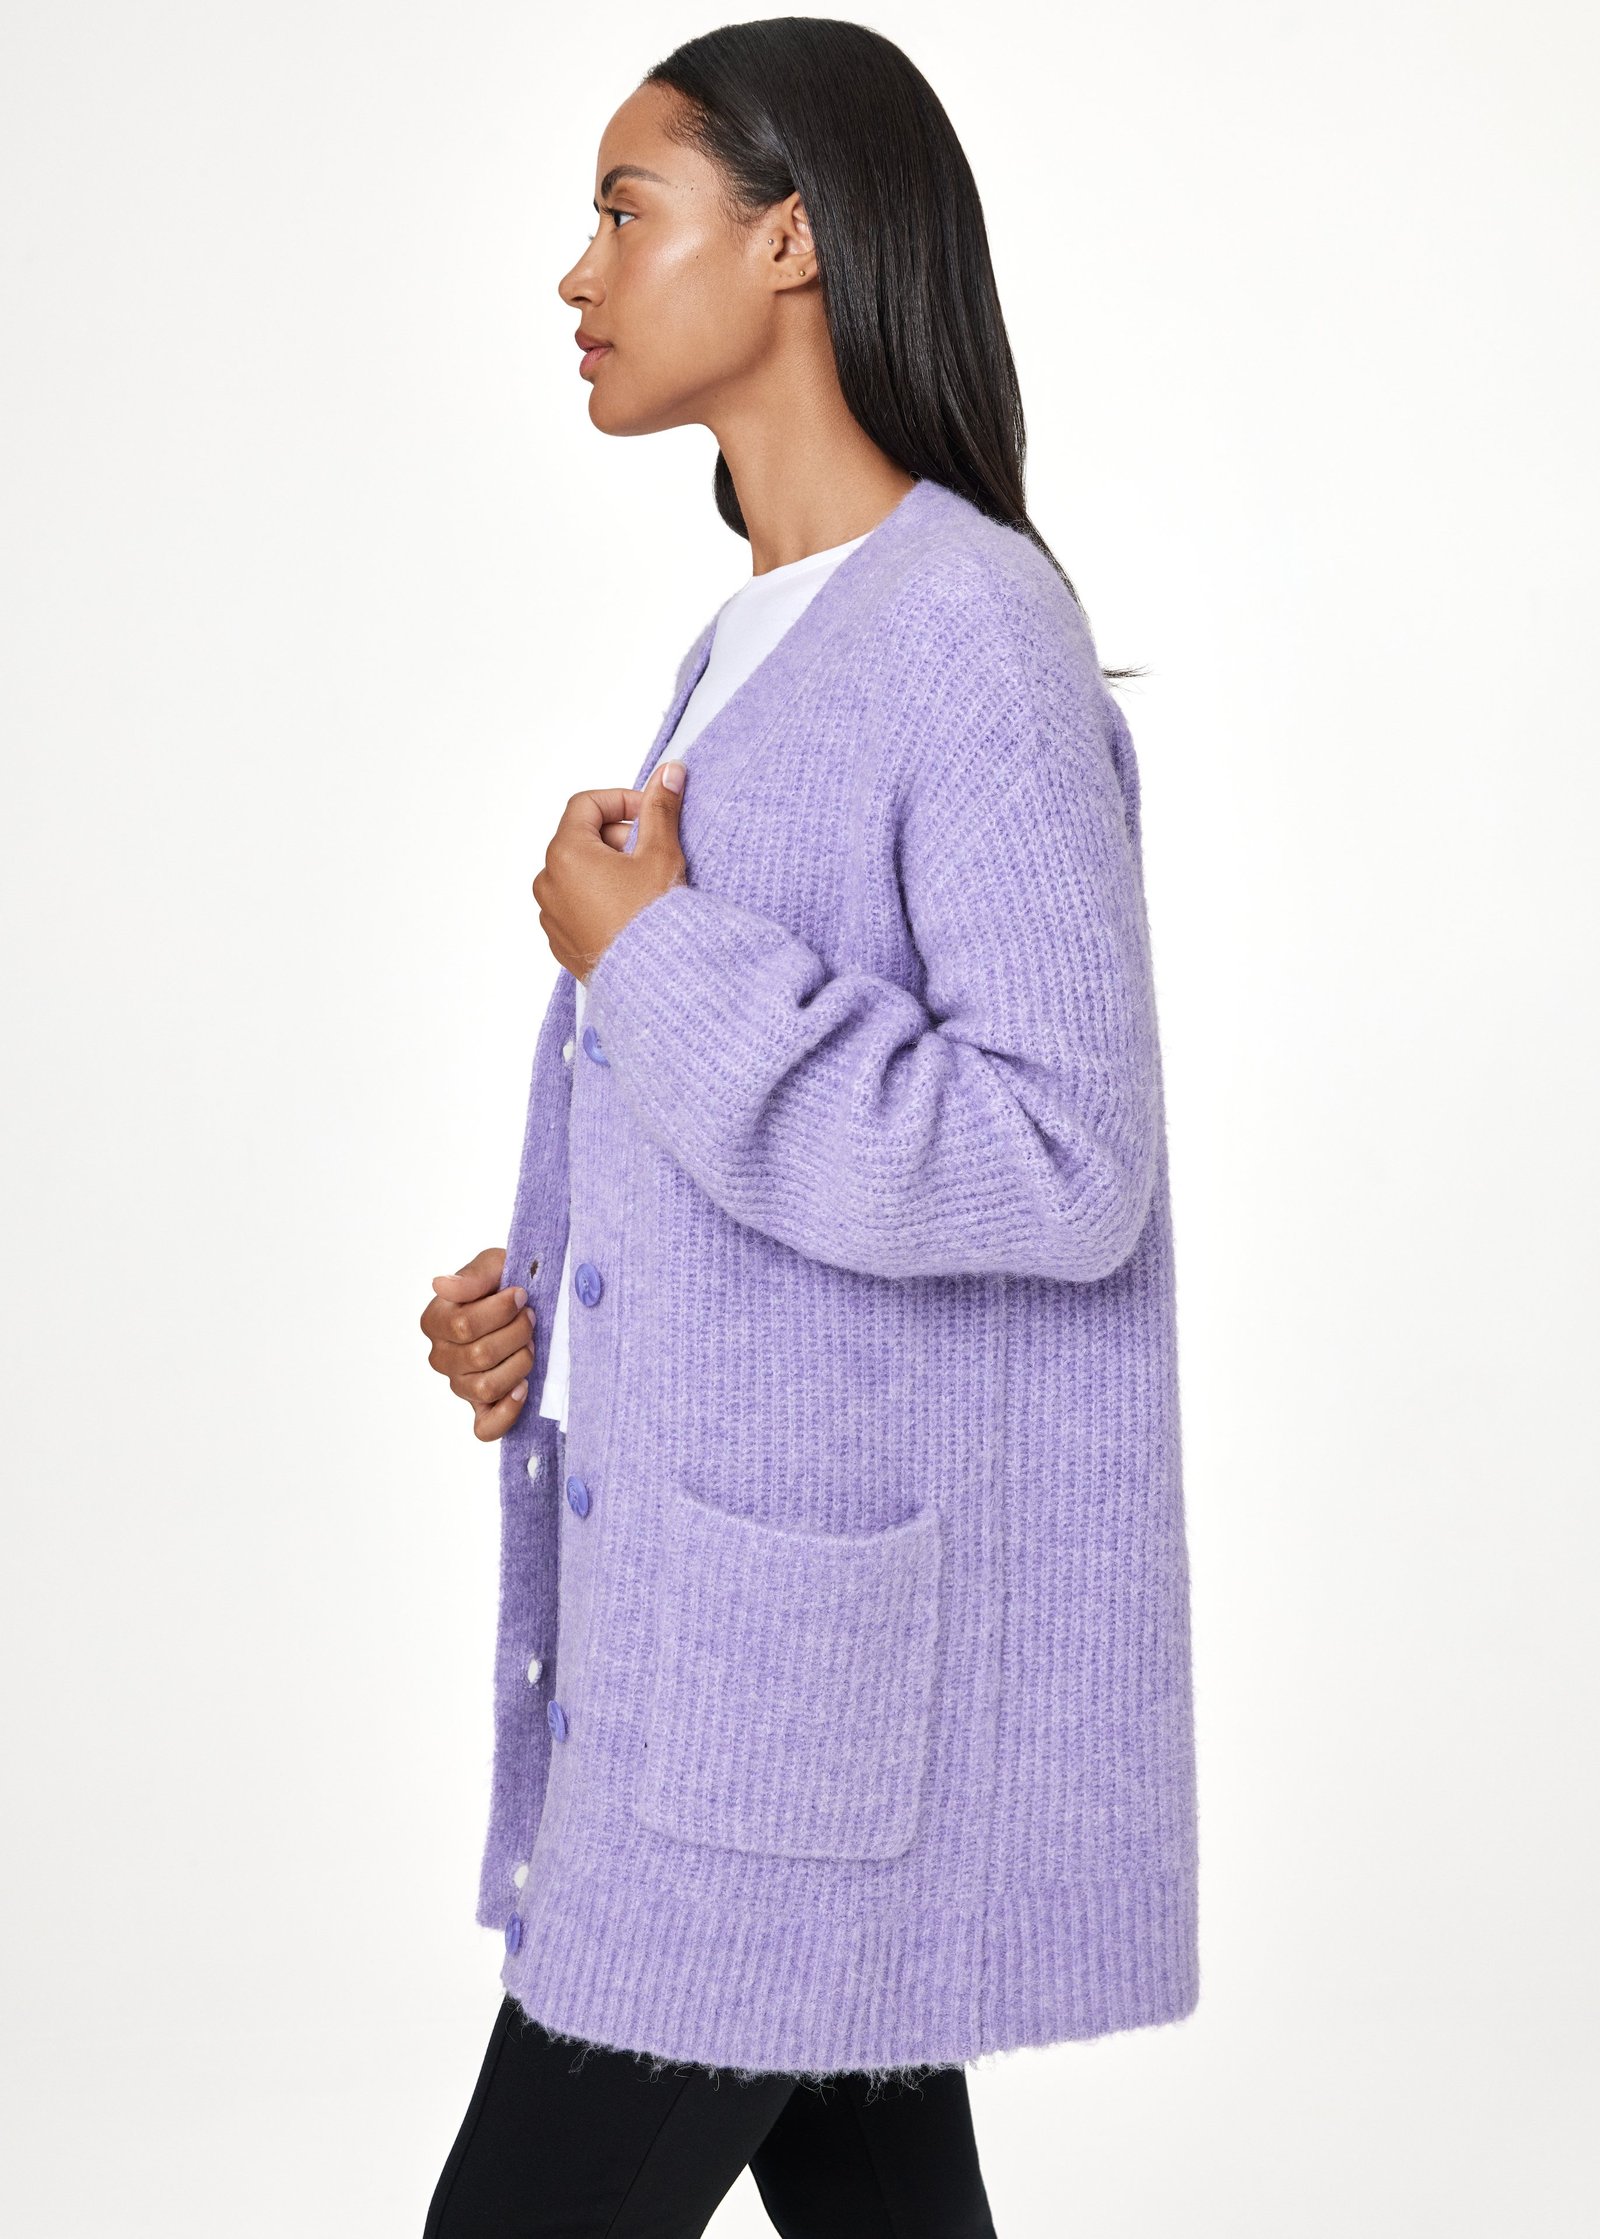 Purple cardigan with buttons Image 1